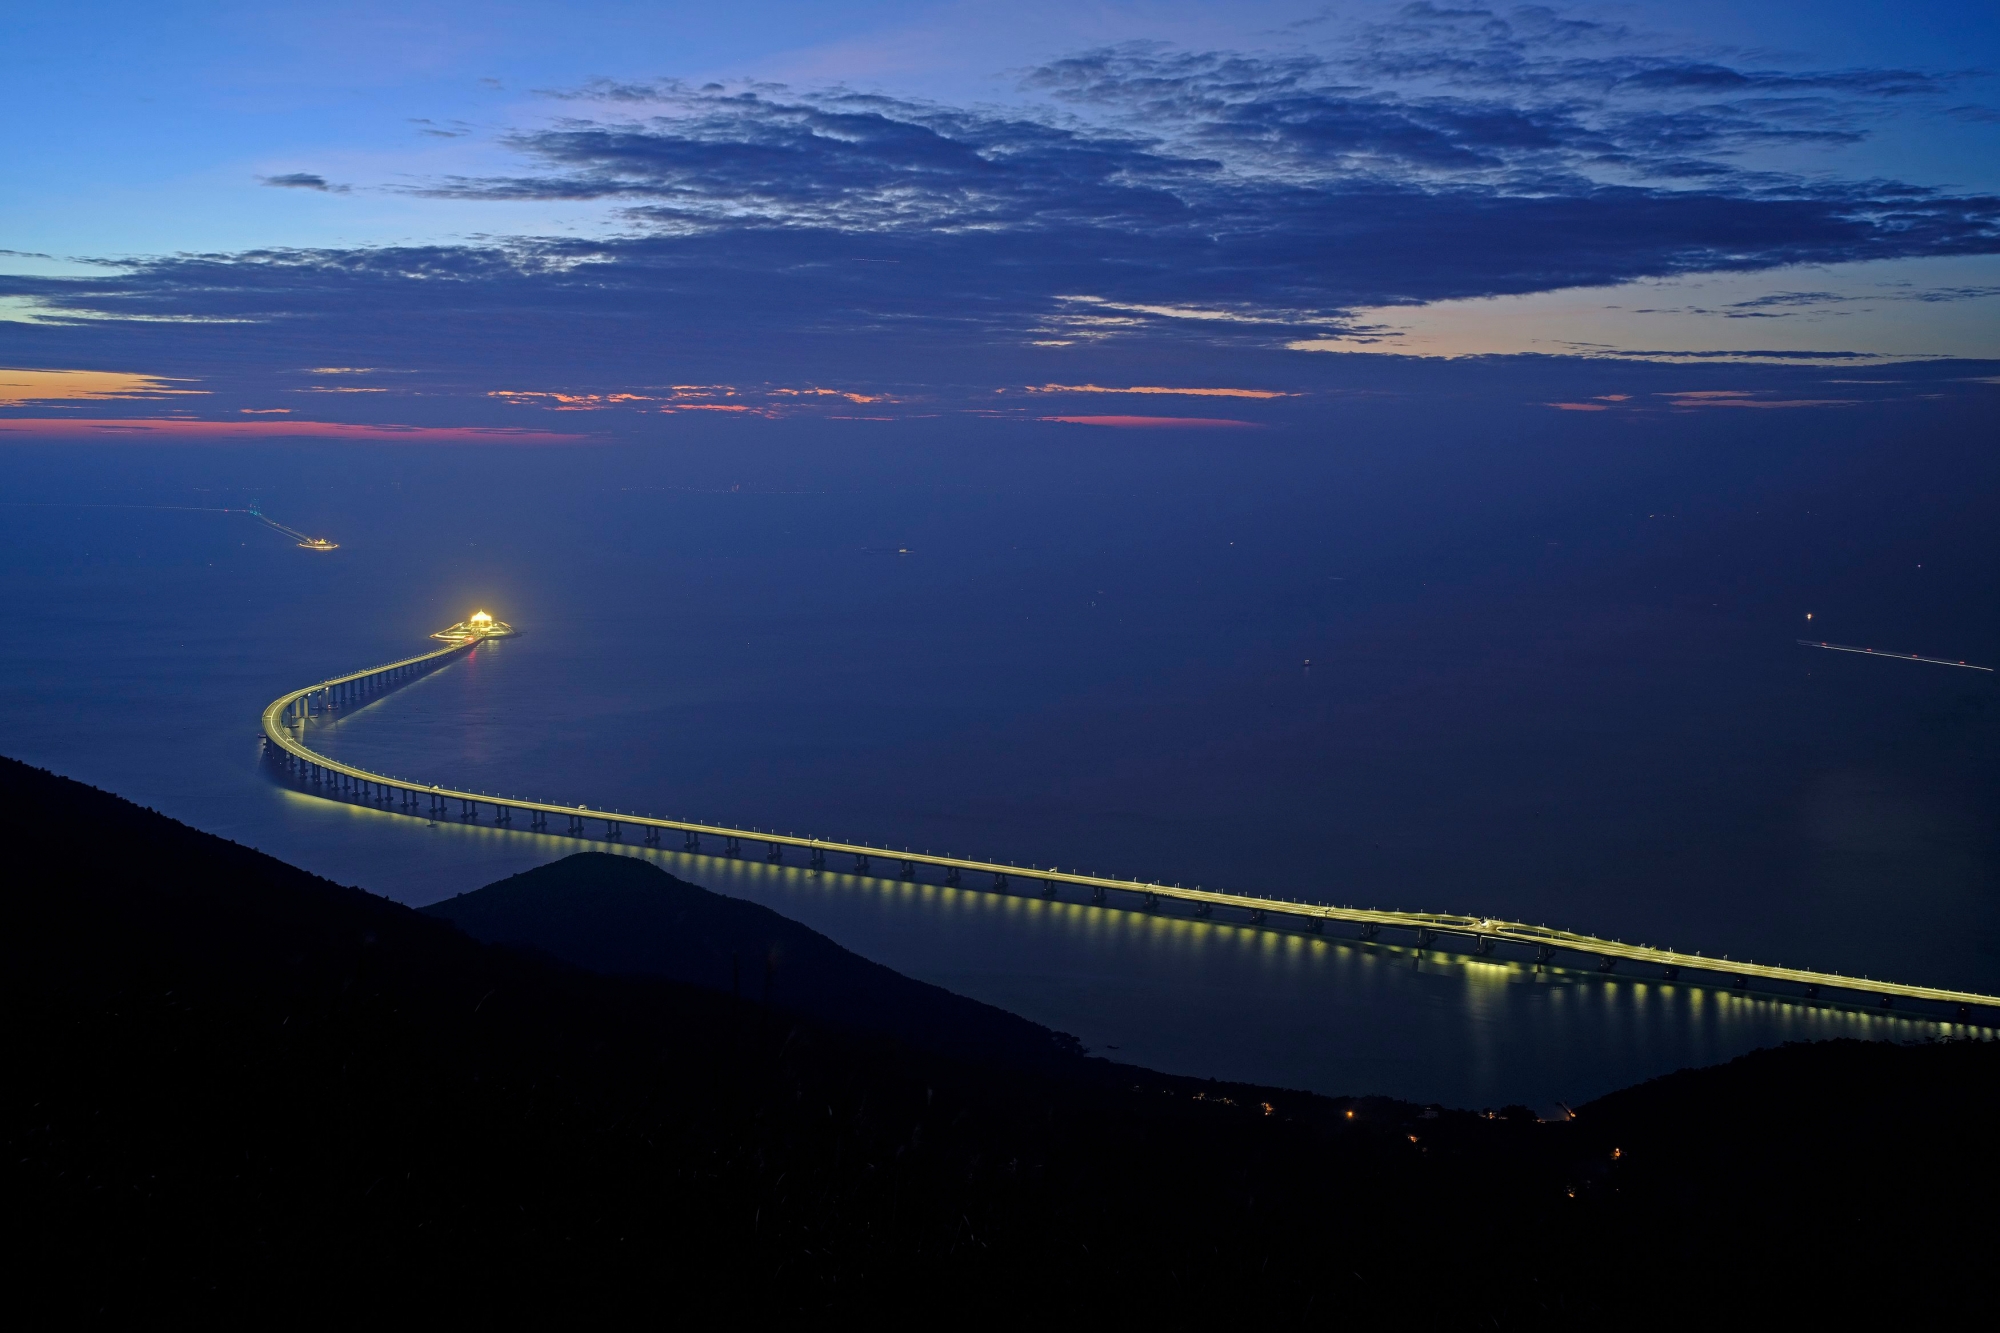 In this Sunday, Oct. 21, 2018, photo, the Hong Kong-Zhuhai-Macau Bridge is lit up in Hong Kong. The bridge, the world's longest cross-sea project, which has a total length of 55 kilometers (34 miles), will have opening ceremony in Zhuhai on Oct. 23. (AP Photo/Vincent Yu) Hong Kong Zhuhai Macau Bridge